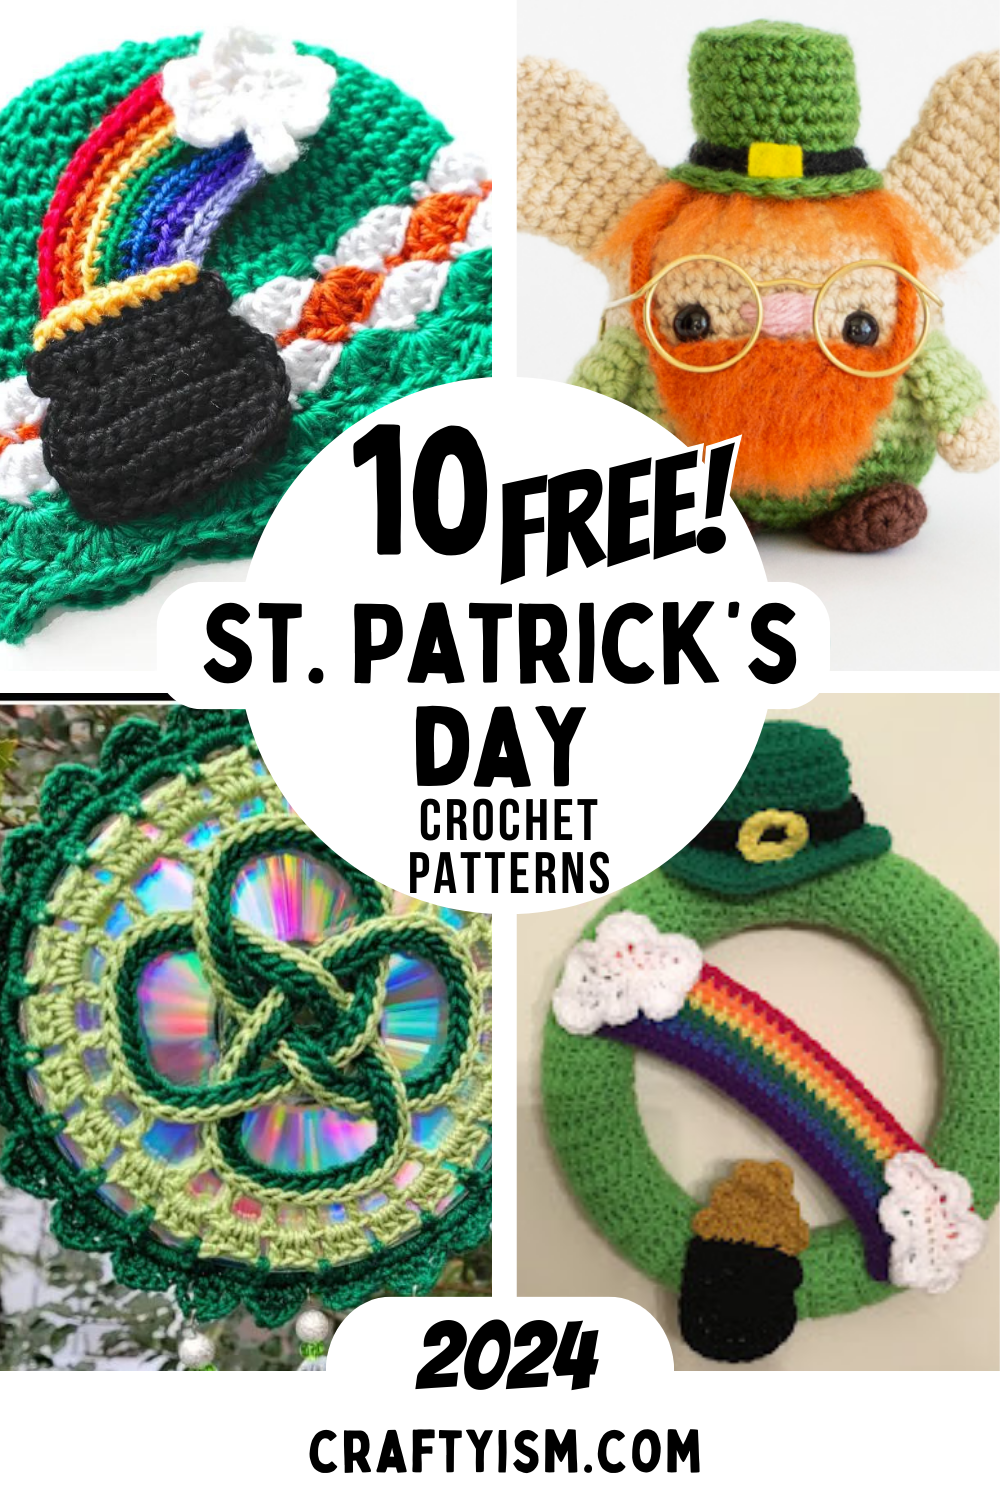 10 free crochet patterns for St. Patrick's Day Blog Post Title image